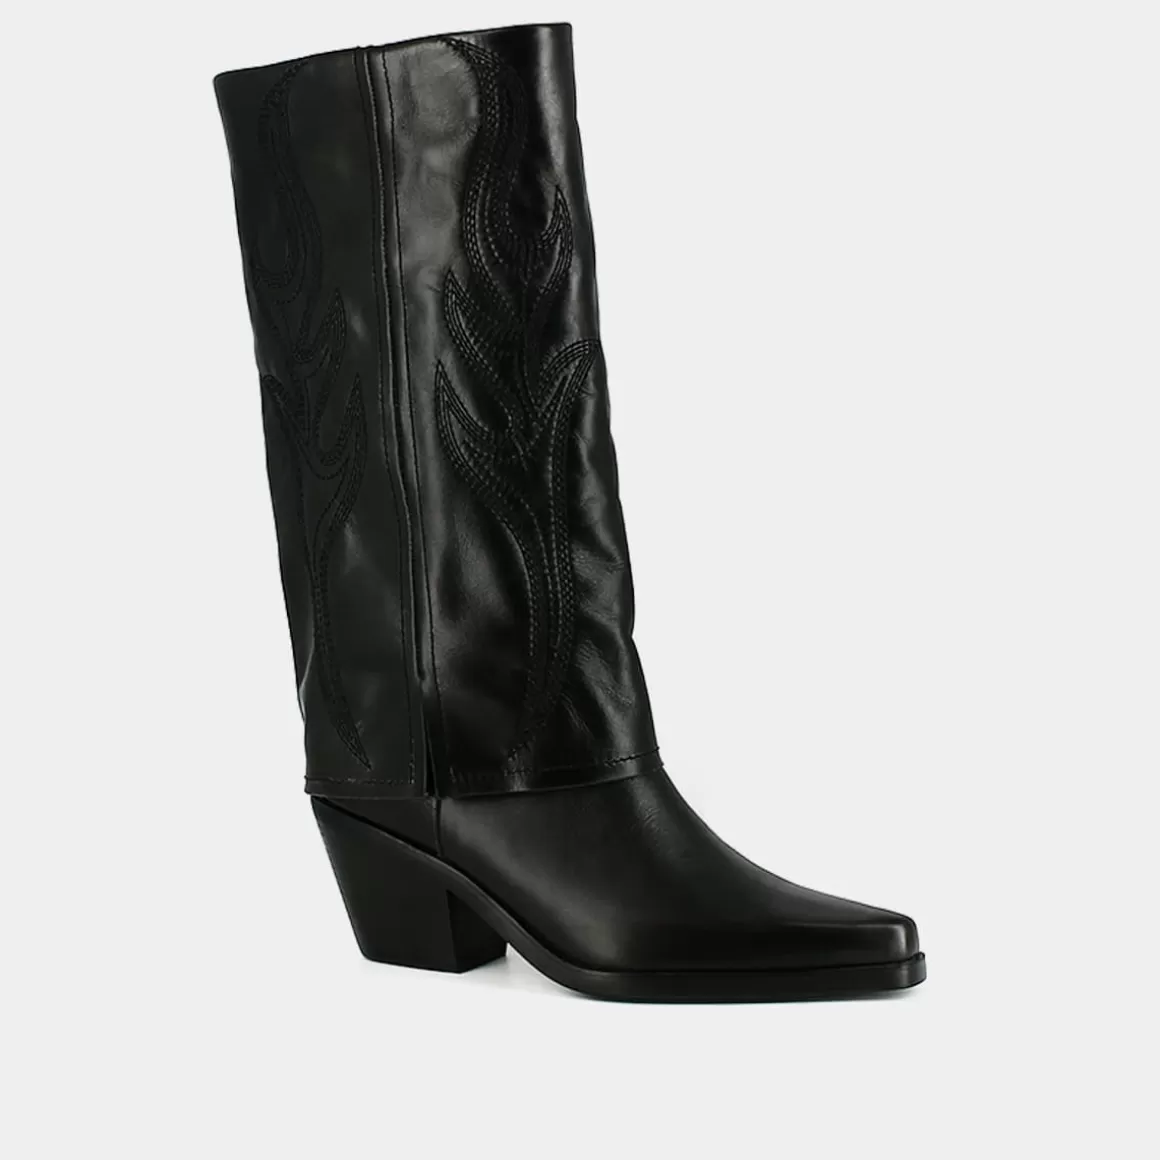 Boots with beleved heels<Jonak Clearance